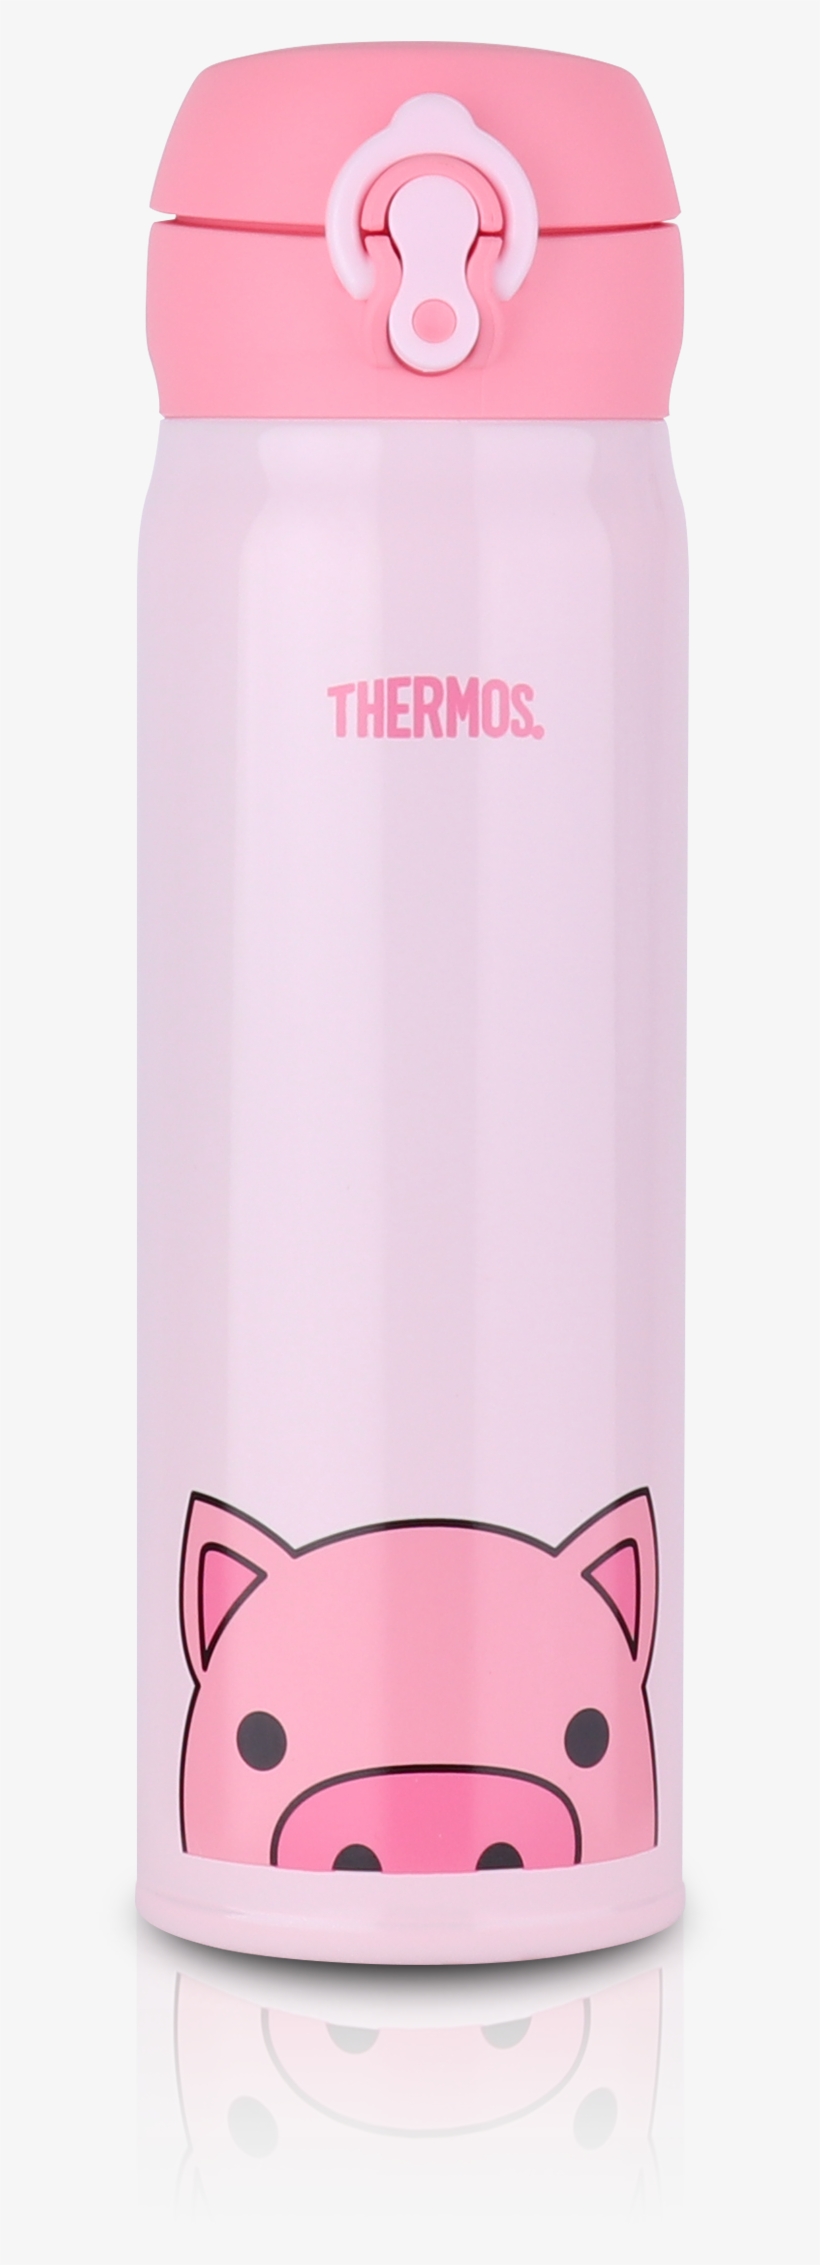 5l Pig Year Edition Ultra Light Flask - Thermos Pig, transparent png #8132352